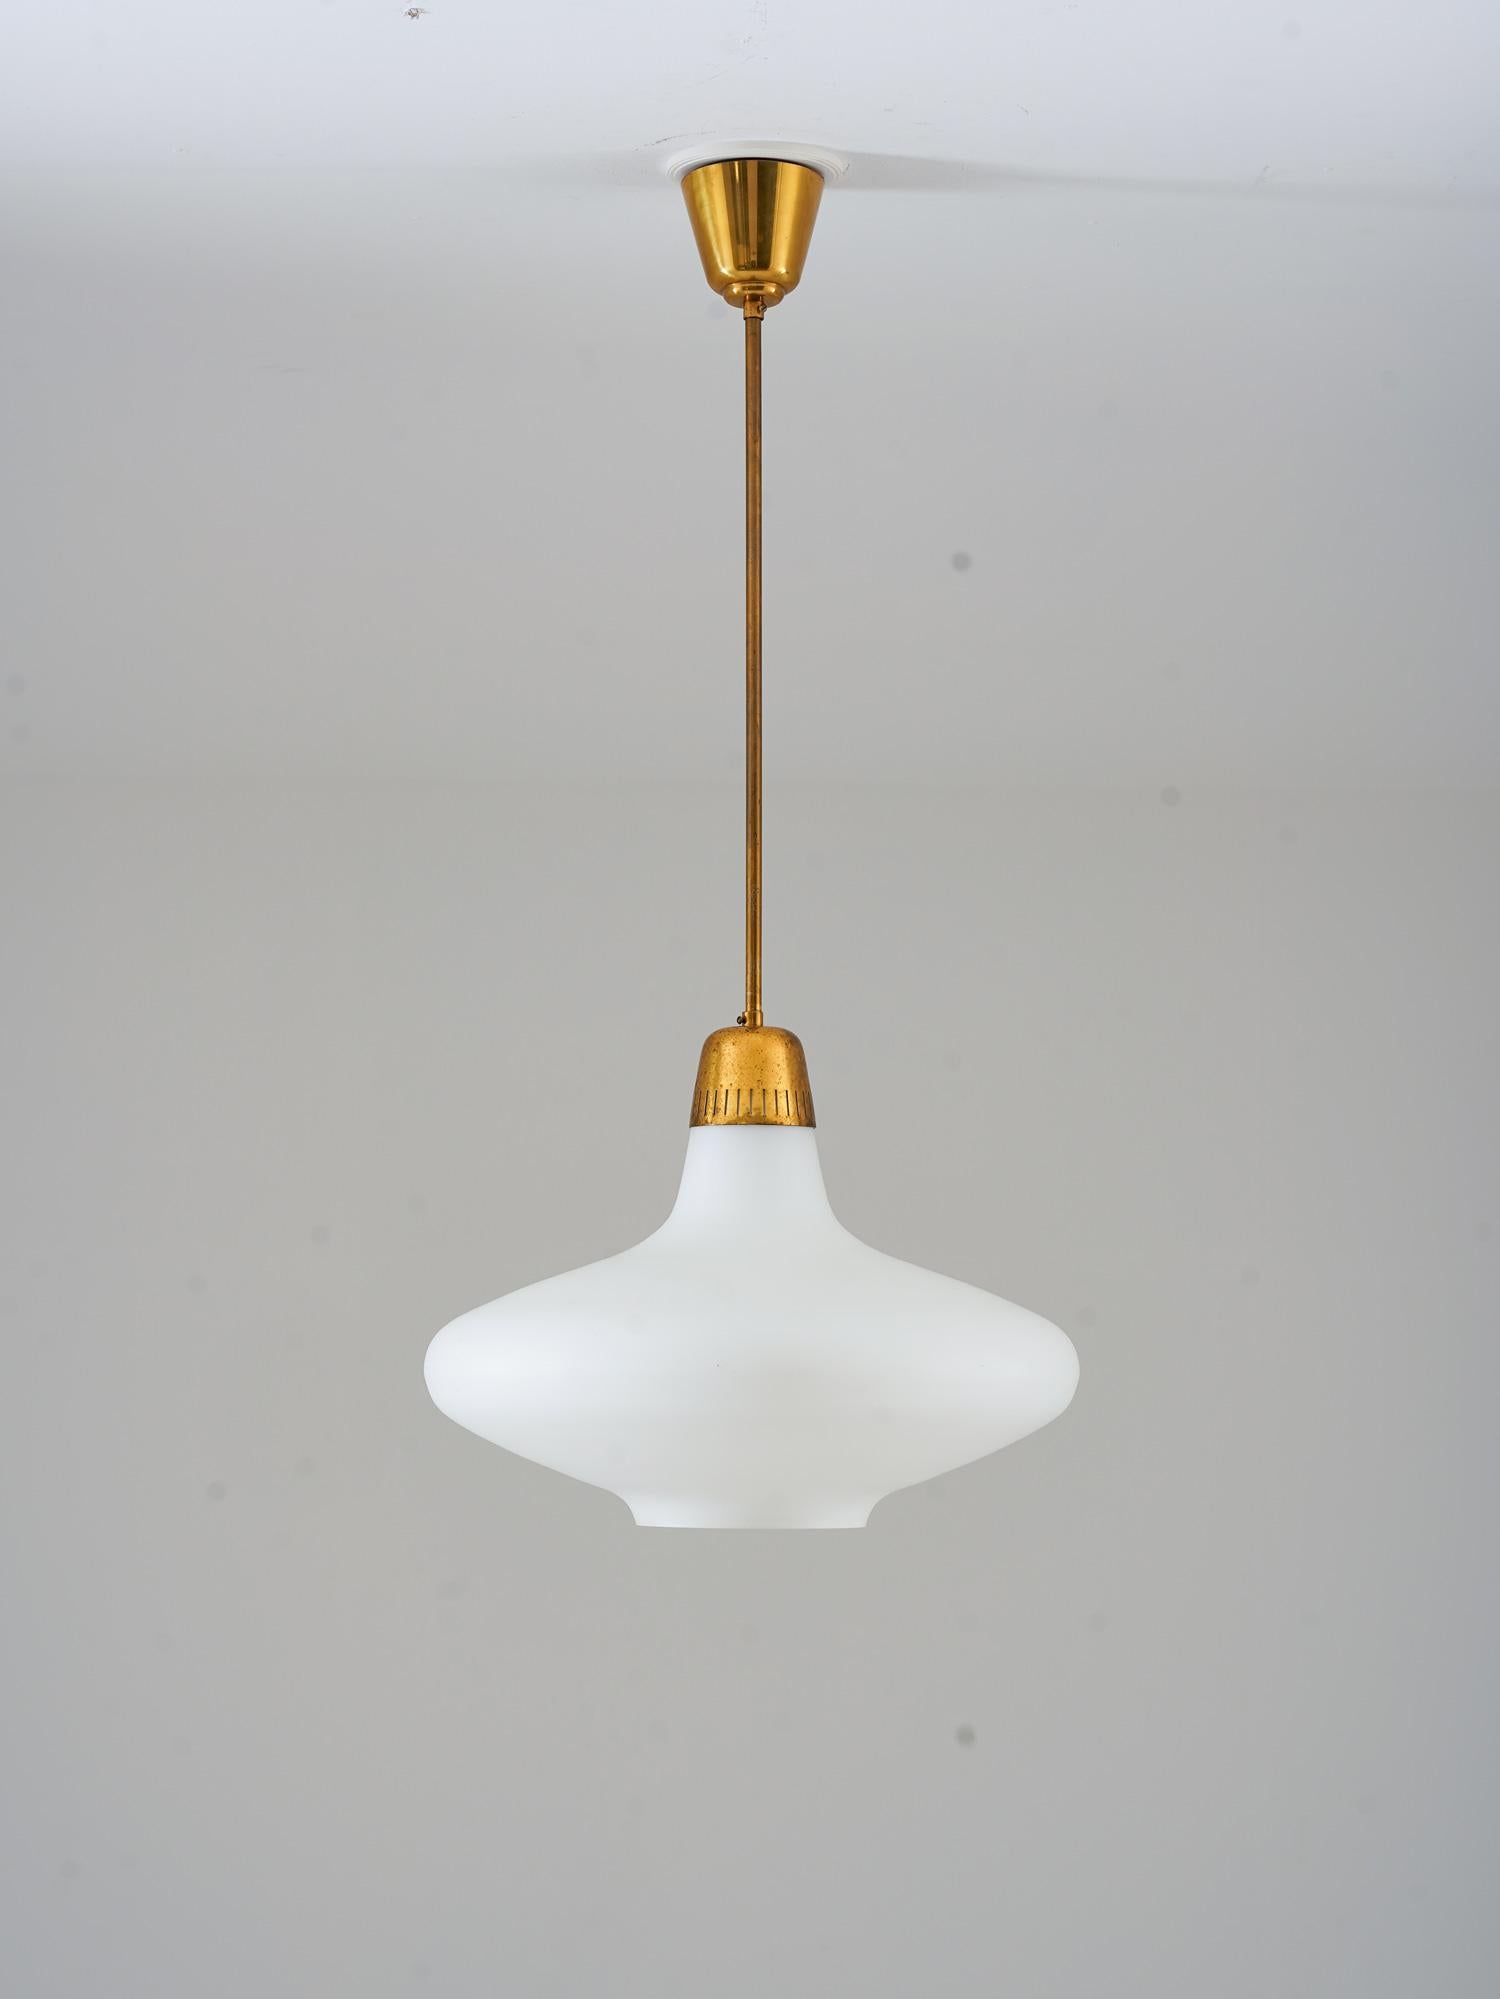 Swedish modern pendant in brass and frosted opaline glass model 1578 produced by Bröderna Malmströms Metallvarufrabrik, Sweden.
This great looking pendant is made with the quality and details that Bröderna Malmströms is famous for. The opaline glass